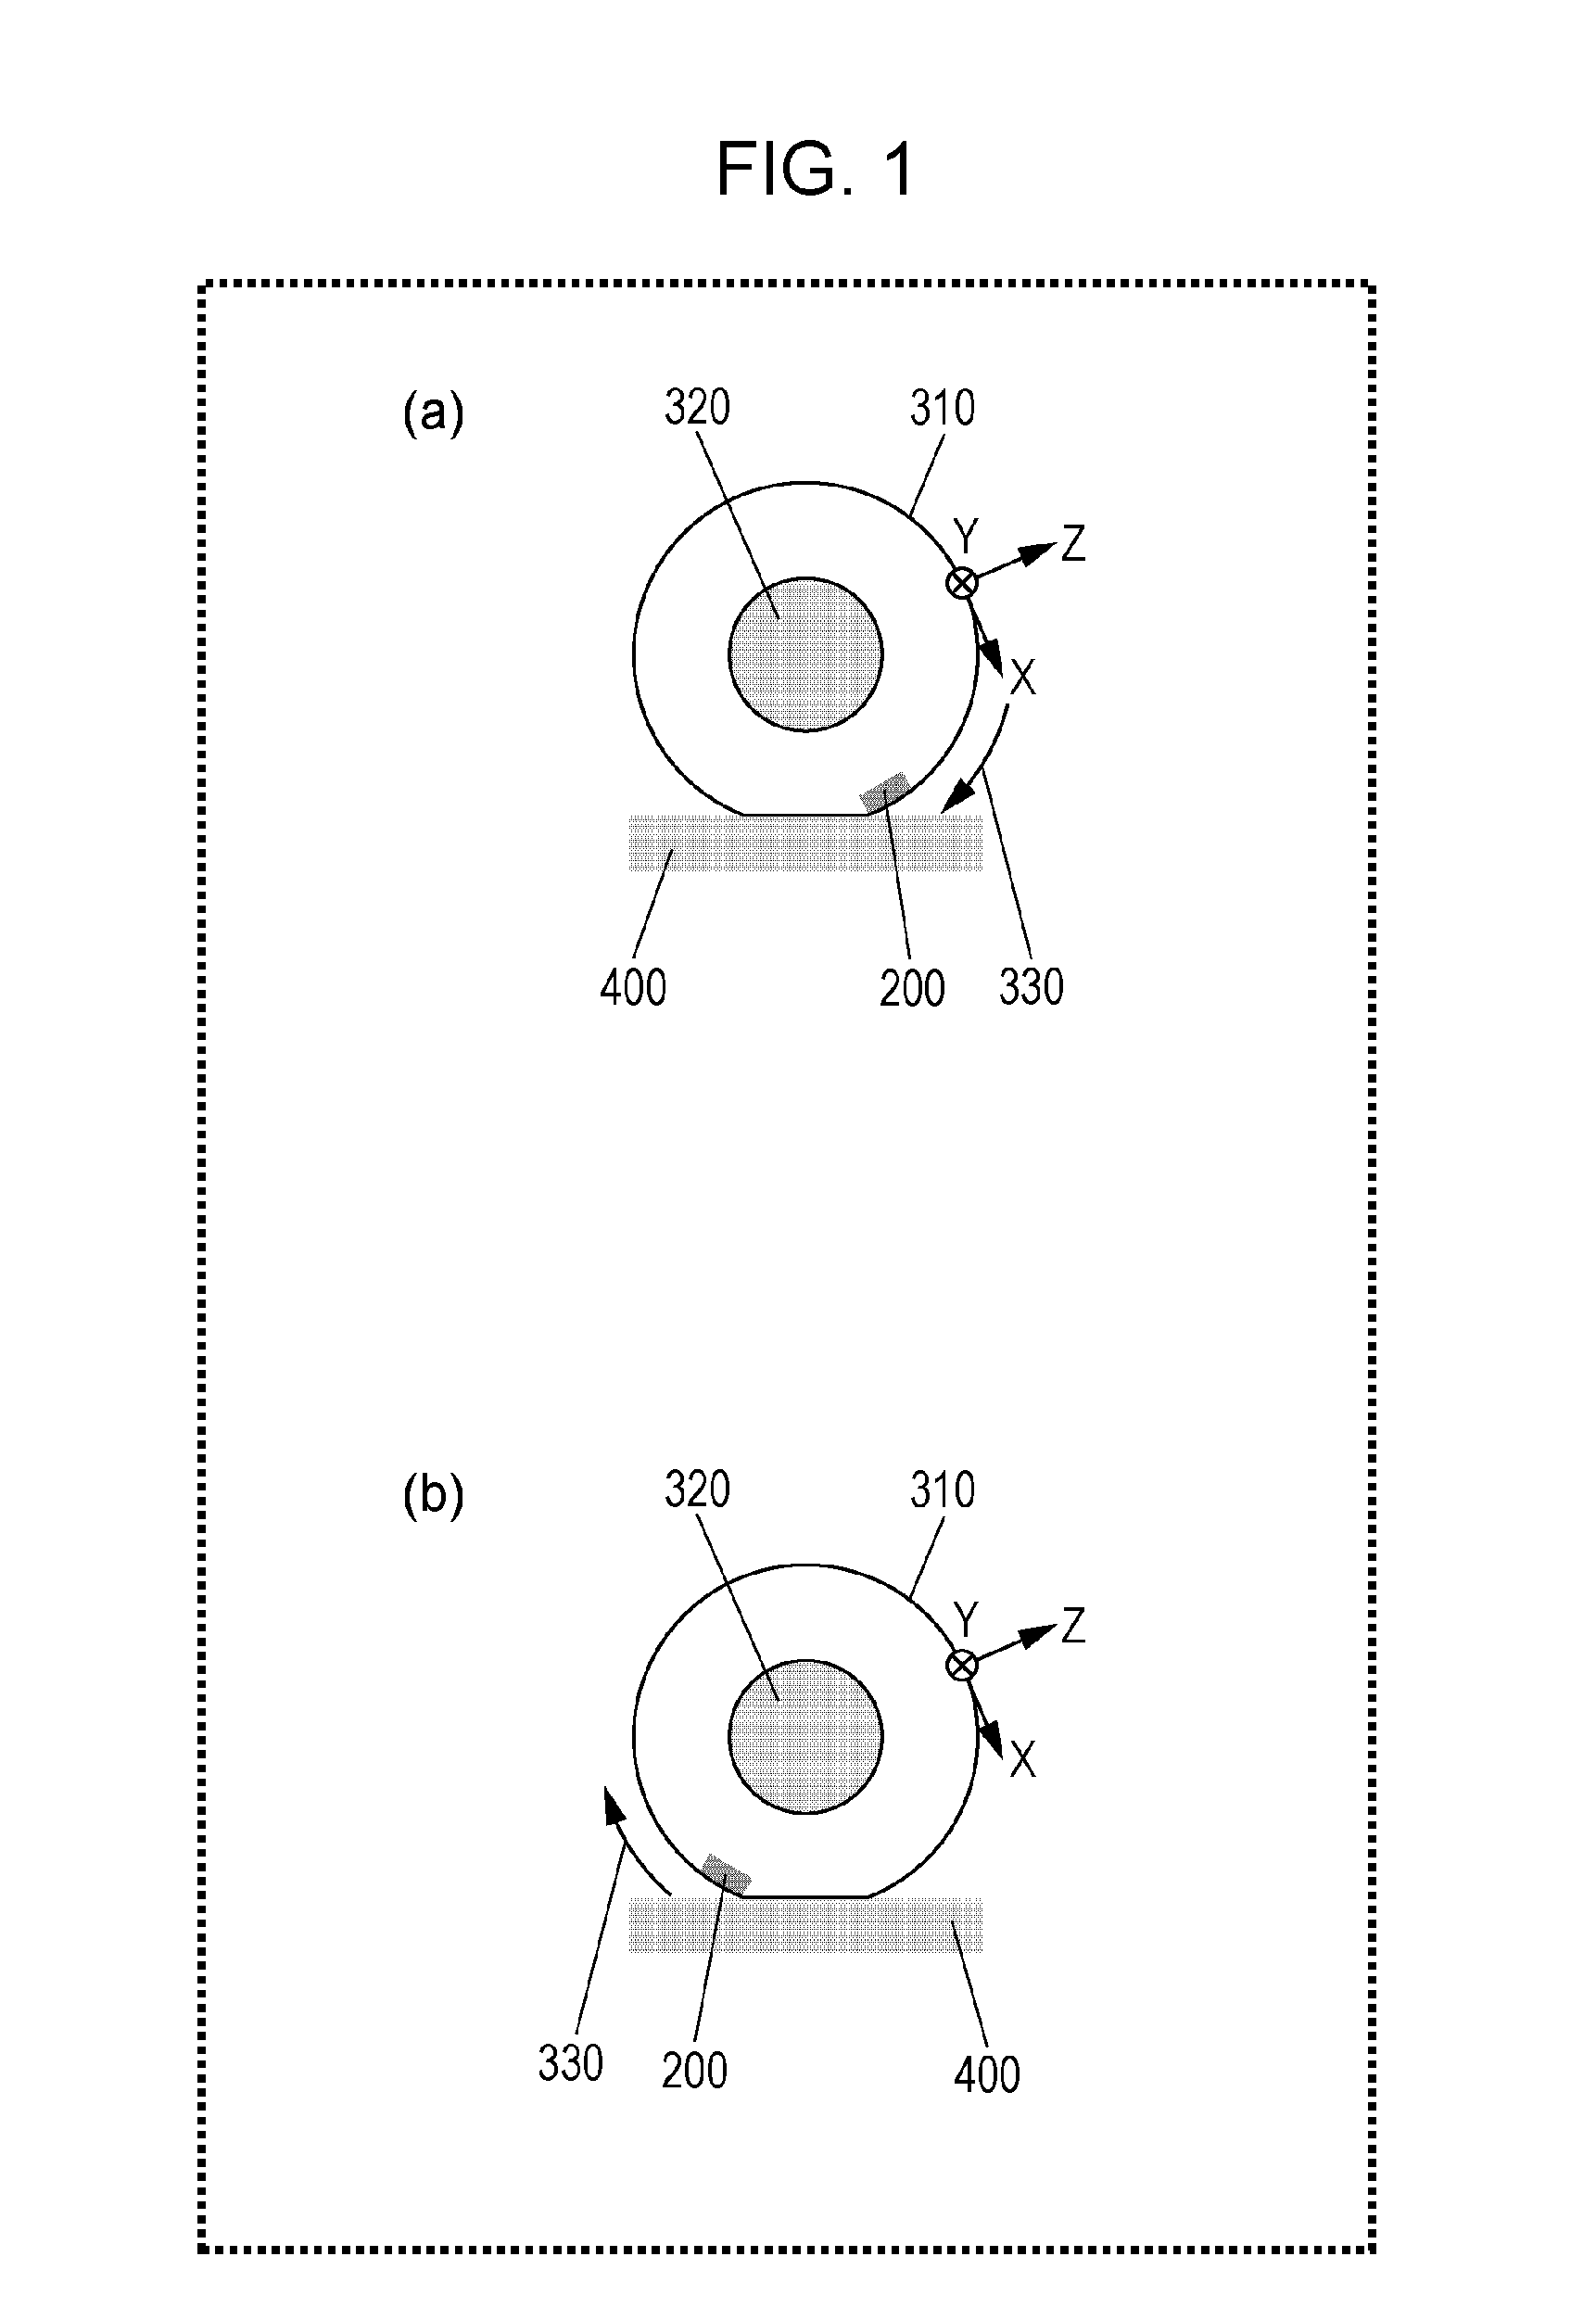 Power-generating vibration sensor, and tire and electrical device using the same